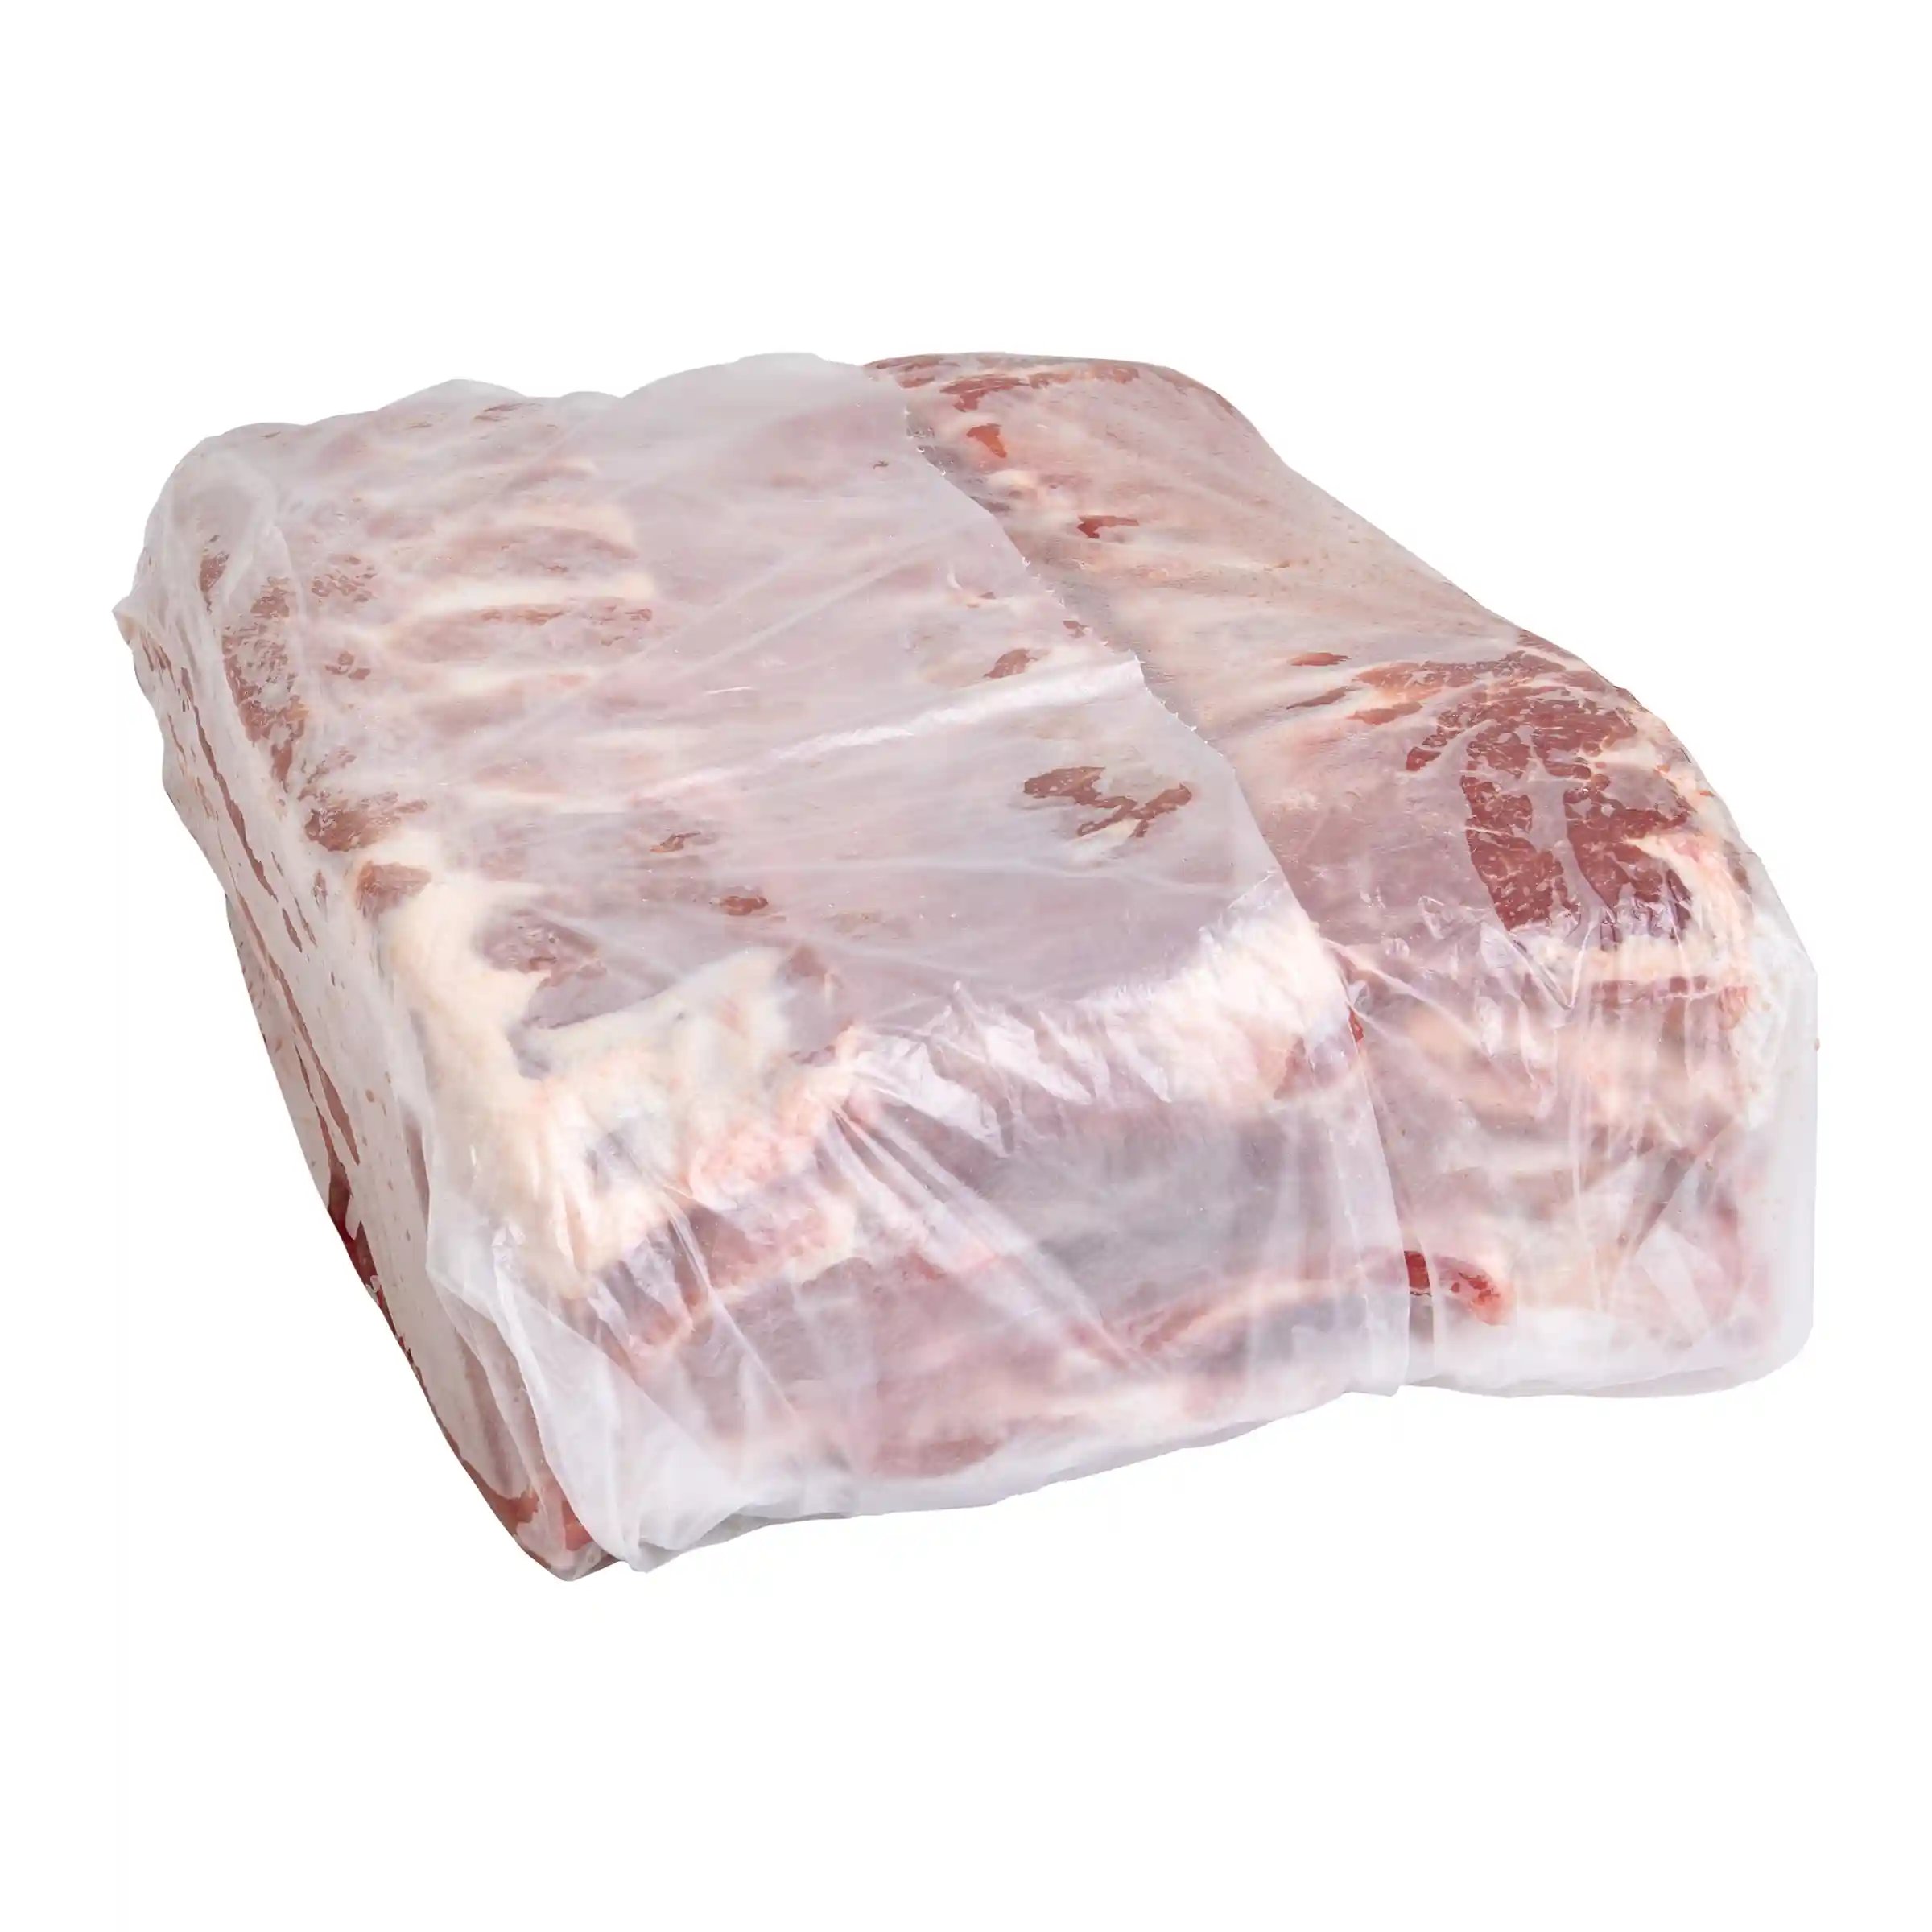 ibp Trusted Excellence® Brand St. Louis Style Ribs, 2.26 – 2.5 lbs_image_21